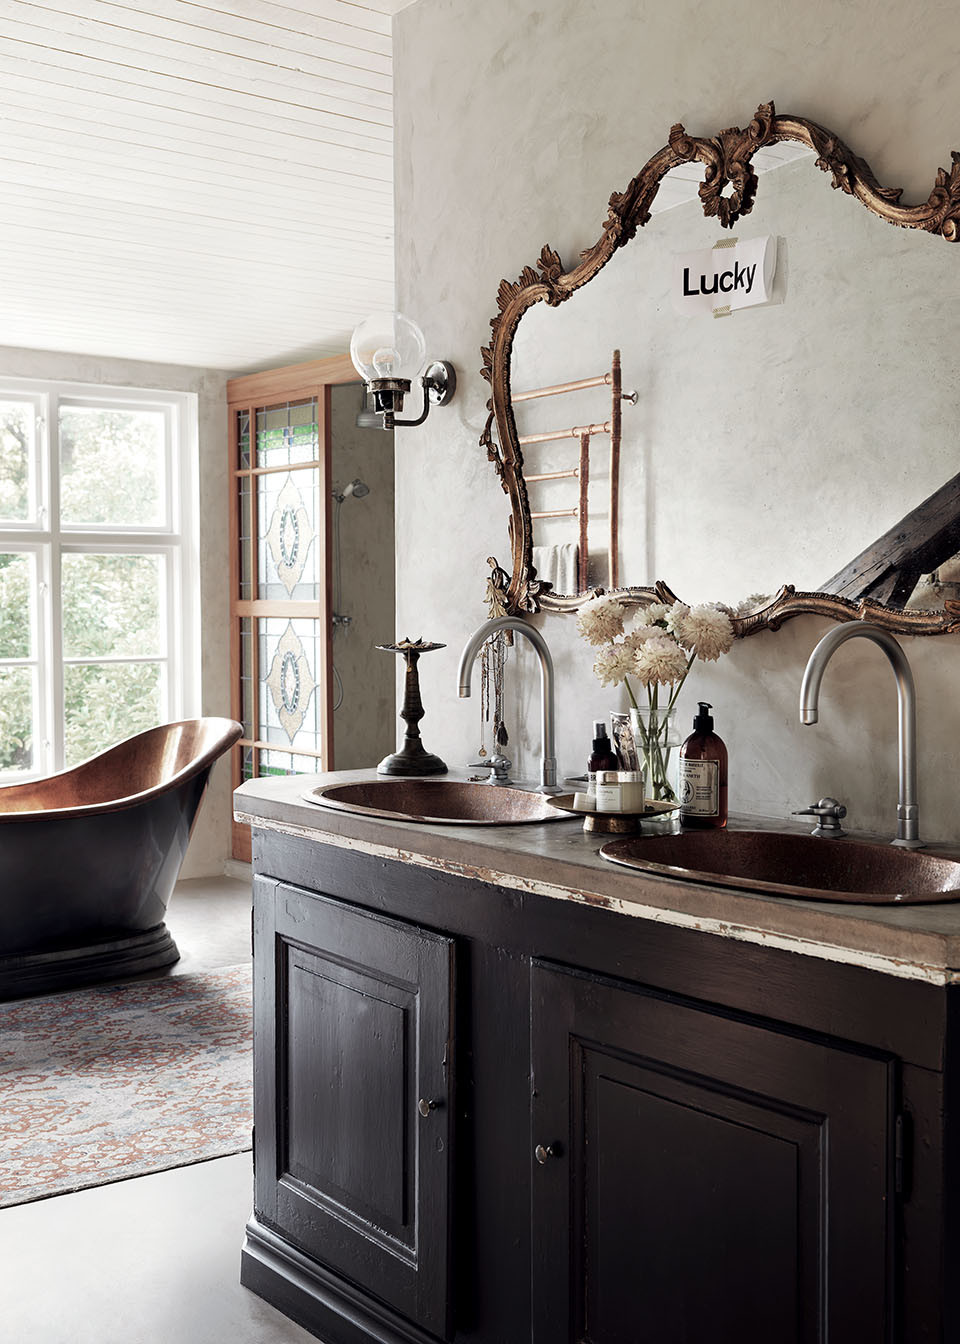 Rustic Bathroom Vanity Mirrors
 Top 10 Most Gorgeous Living Spaces Featuring STUNNING